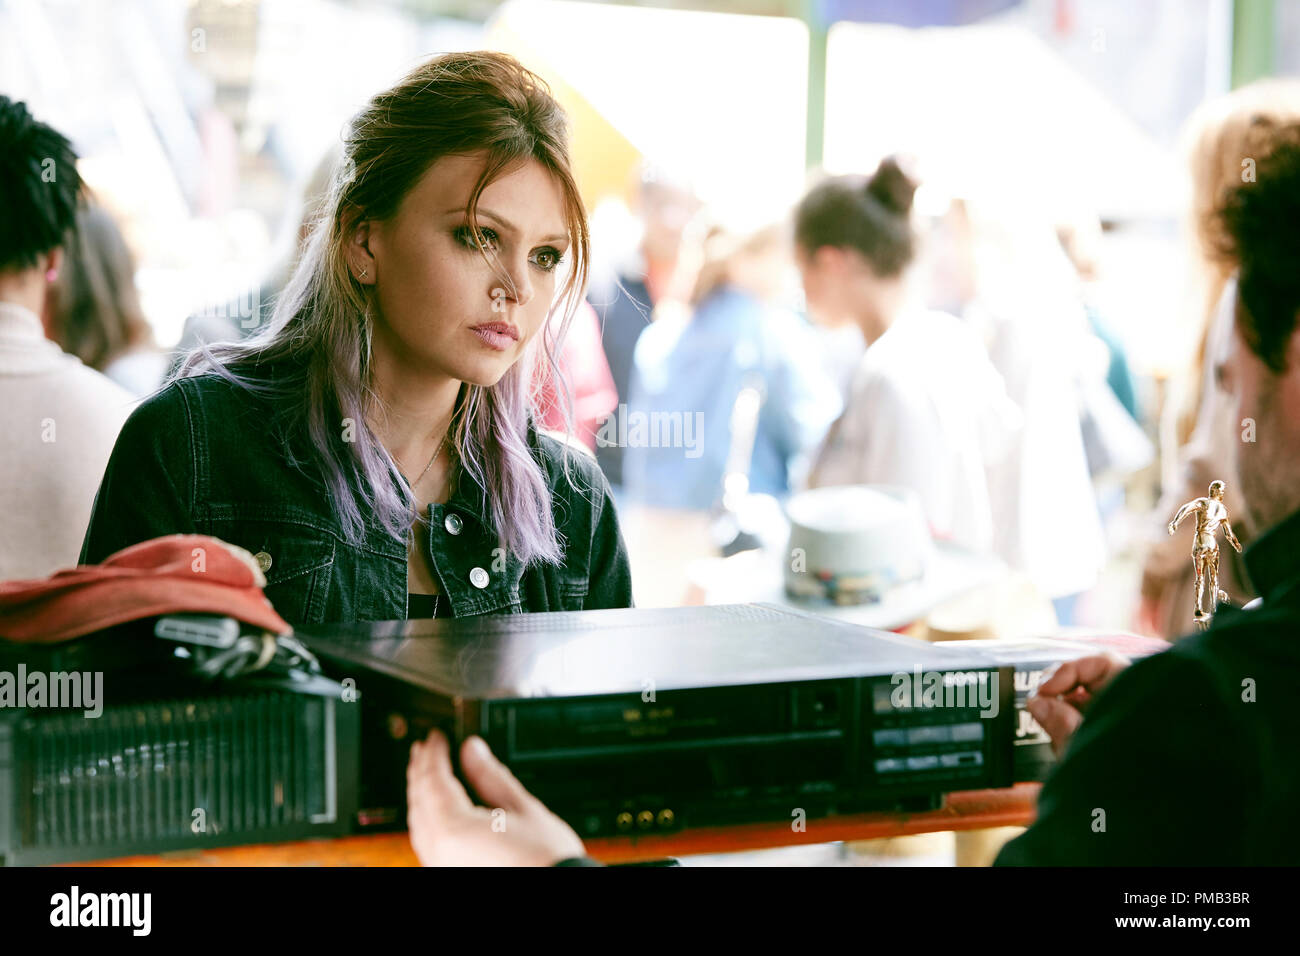 Aimee Teegarden as Skye in the film RINGS by Paramount Pictures (2017 Stock  Photo - Alamy